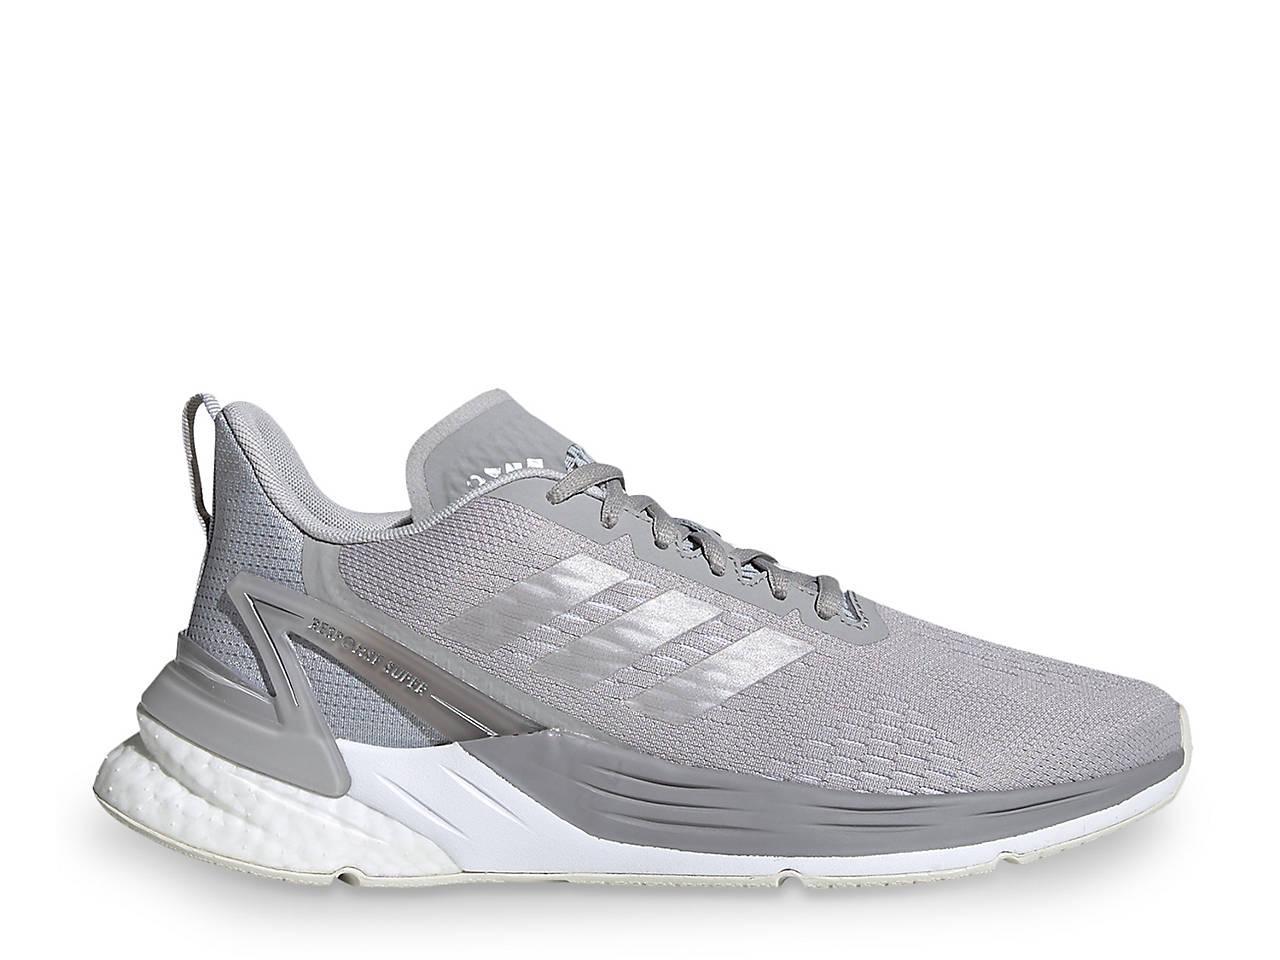 adidas Synthetic Response Super Boost Running Shoe in Grey (Gray) - Lyst